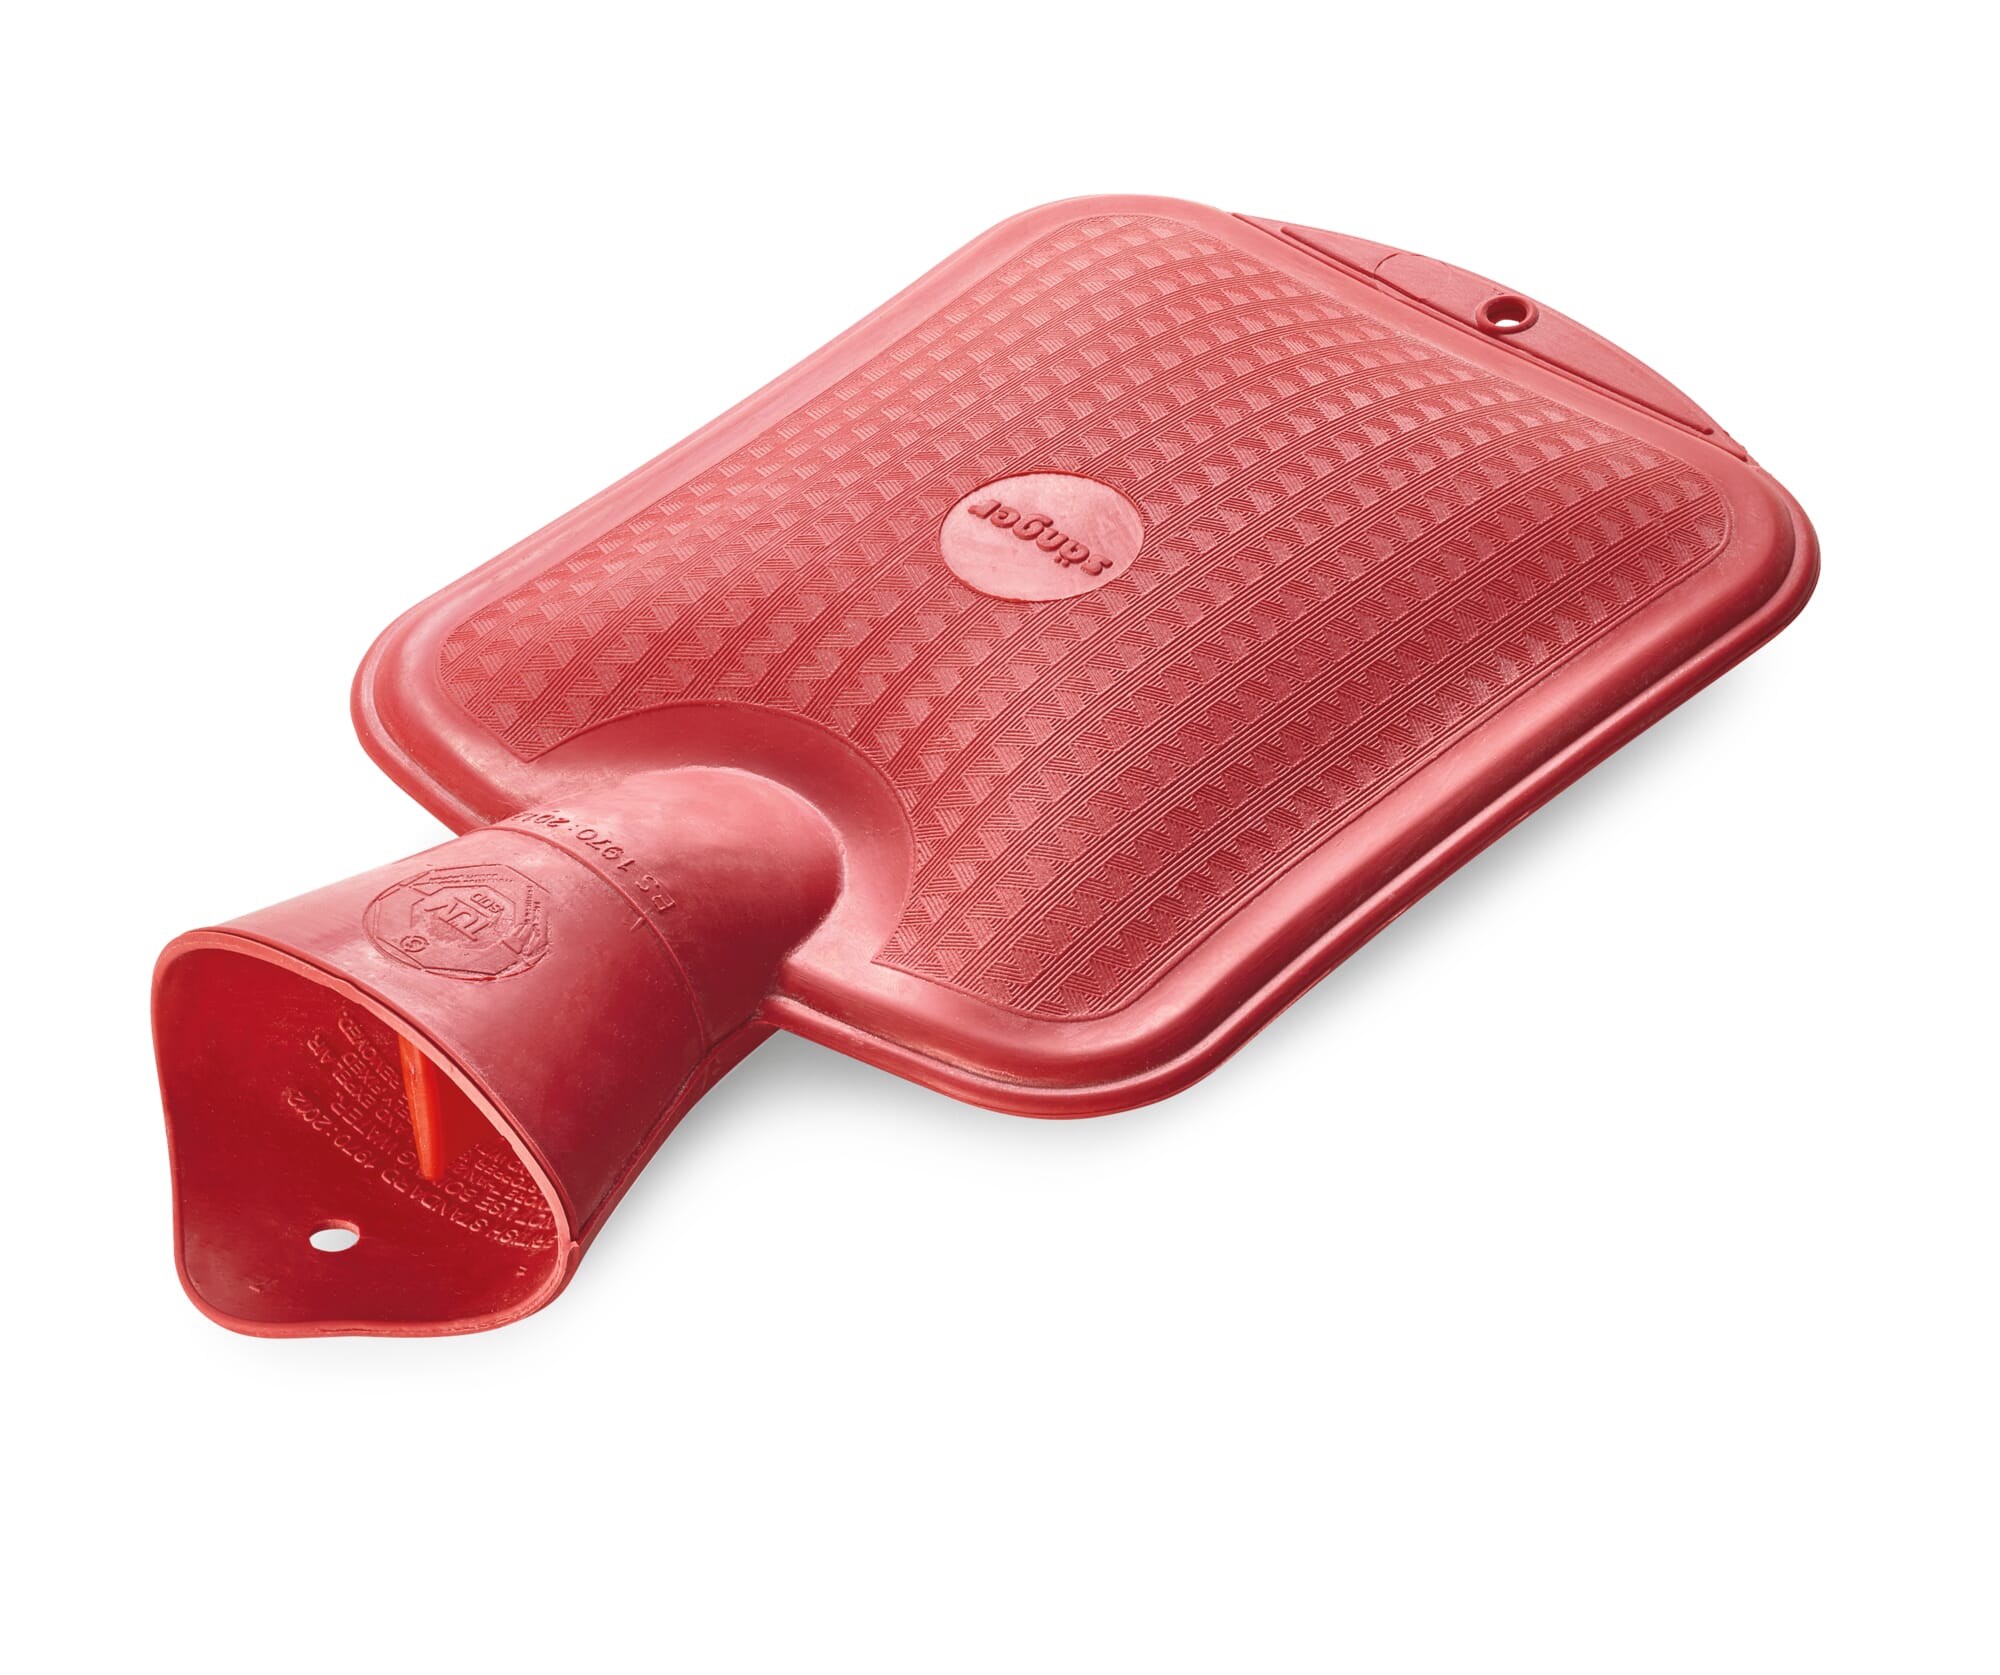 Hot water bottle rubber, Small